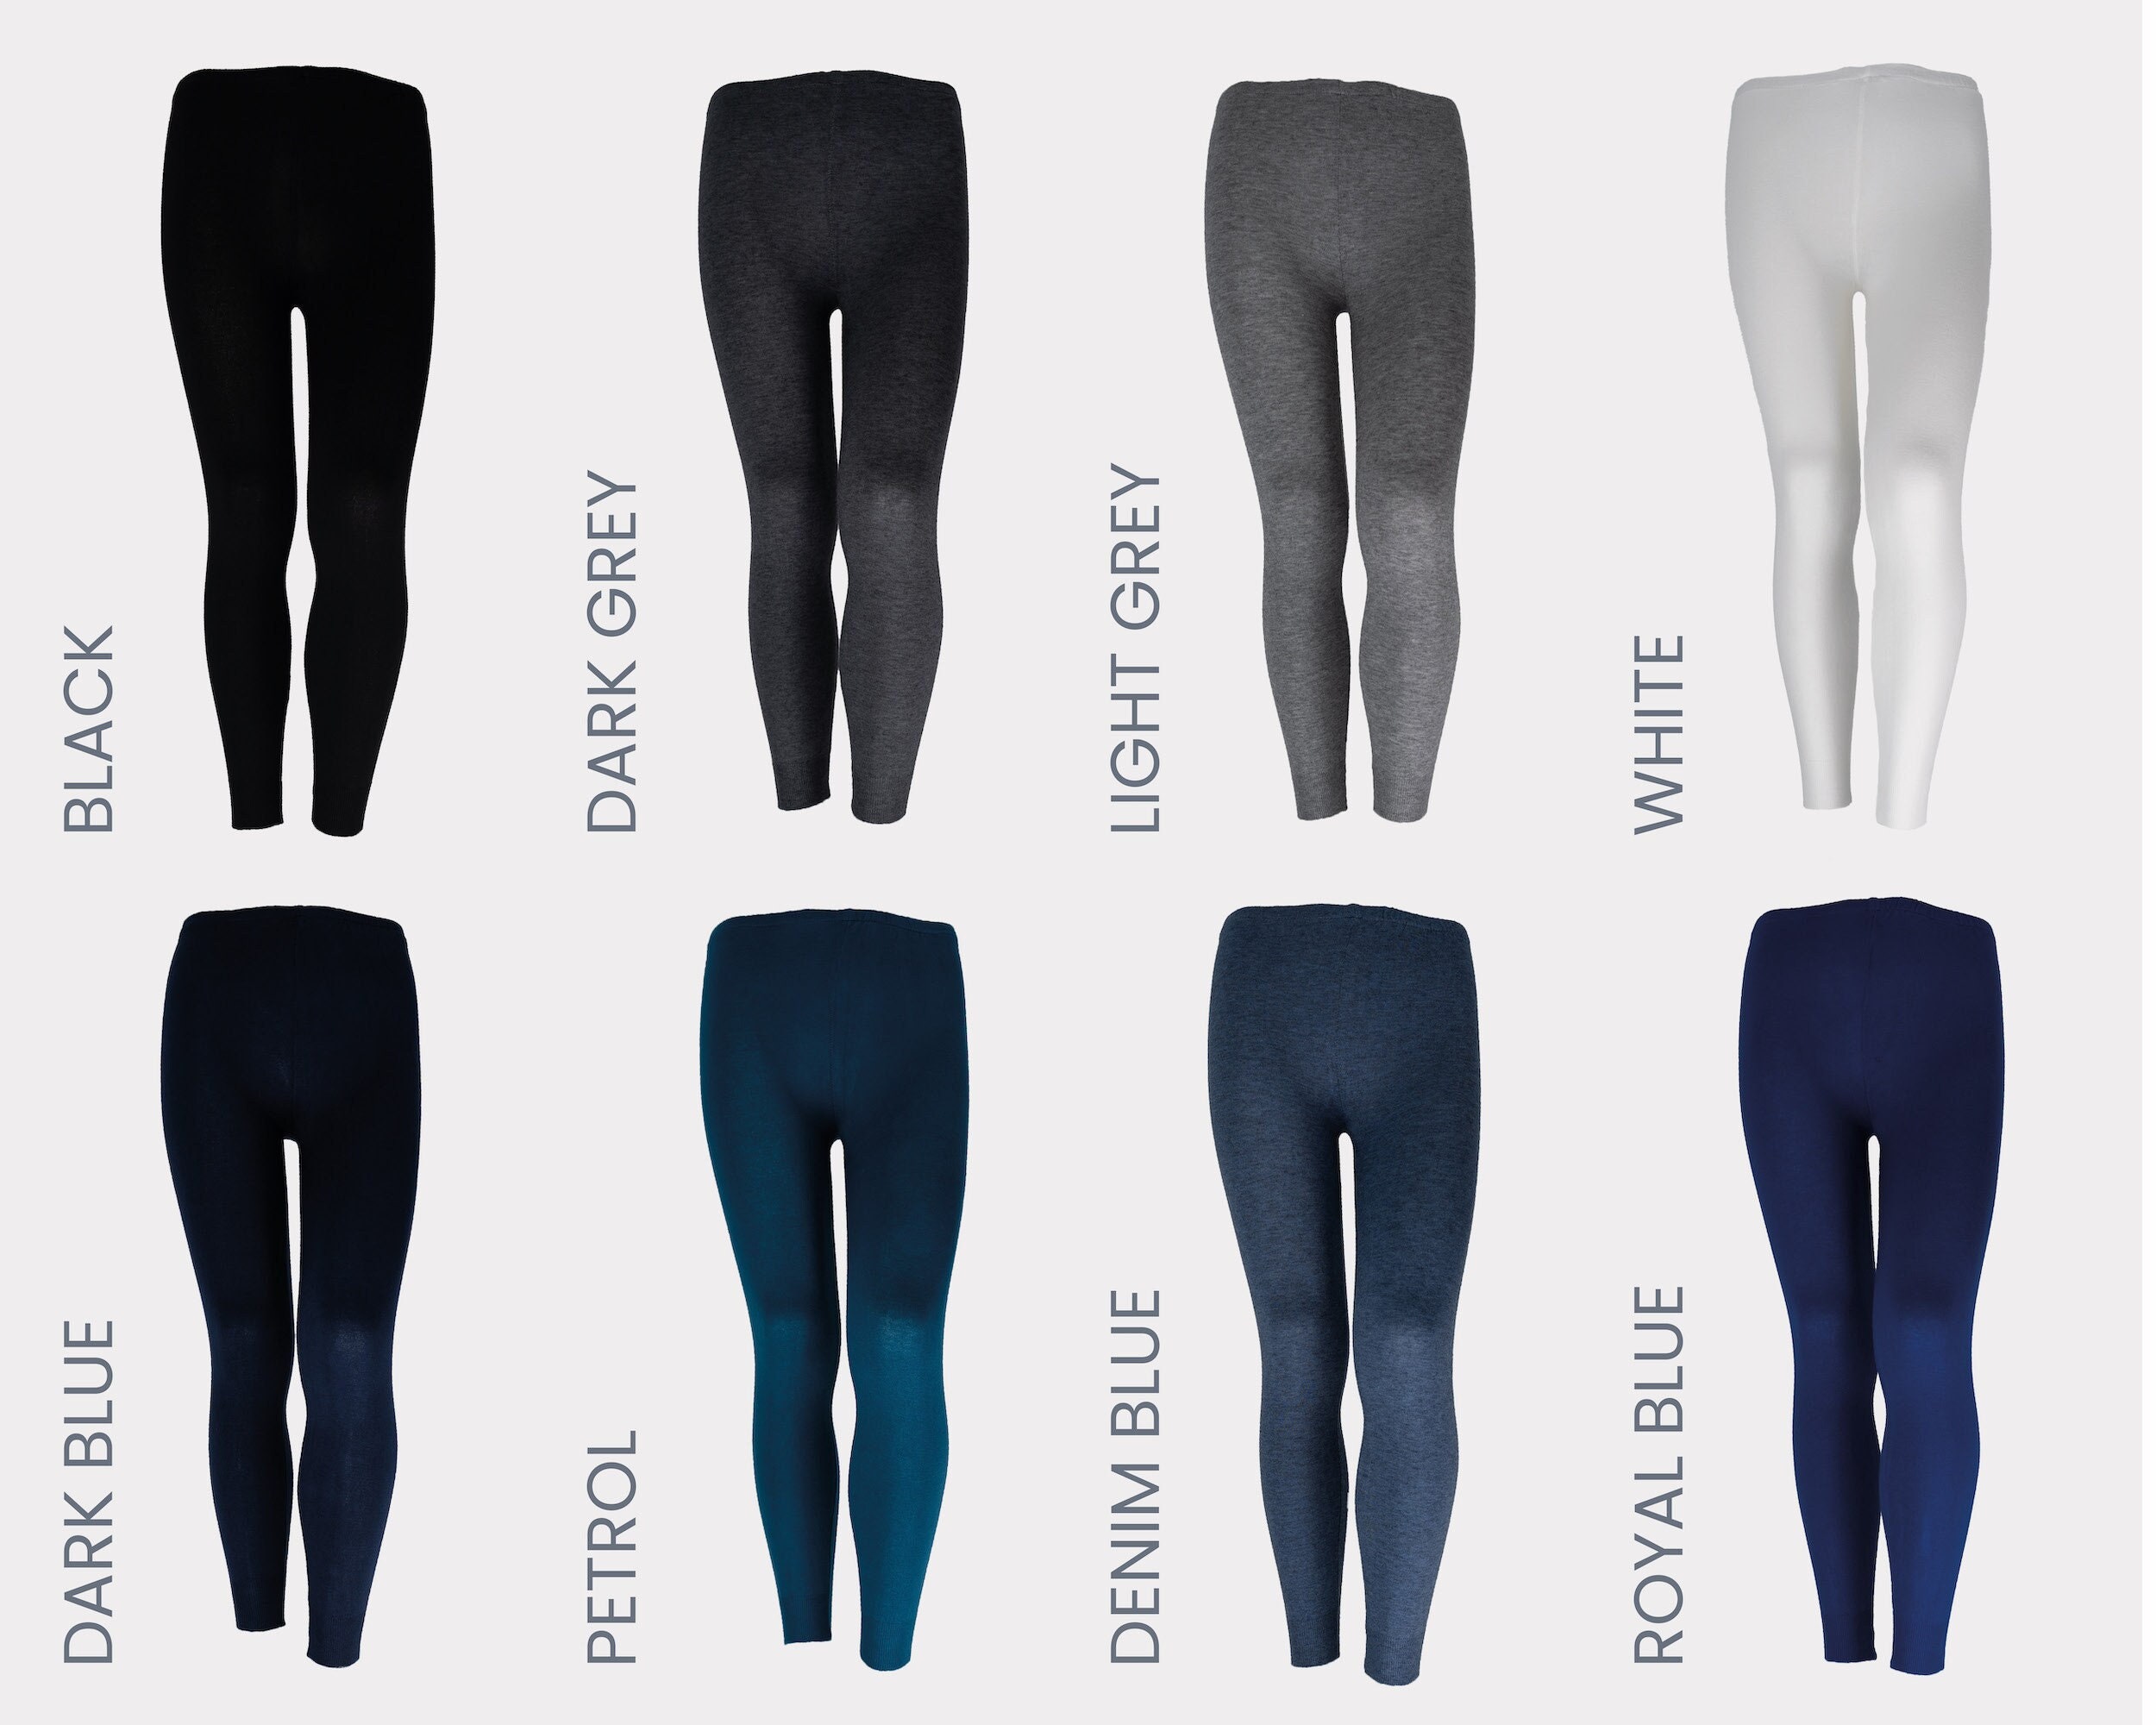 Cashmere Blended Wool Leggings / Leggings for Women / Extra Soft Stretchable  Leggings / Cashmere Knit Tights / Sweater Knit Leggings 